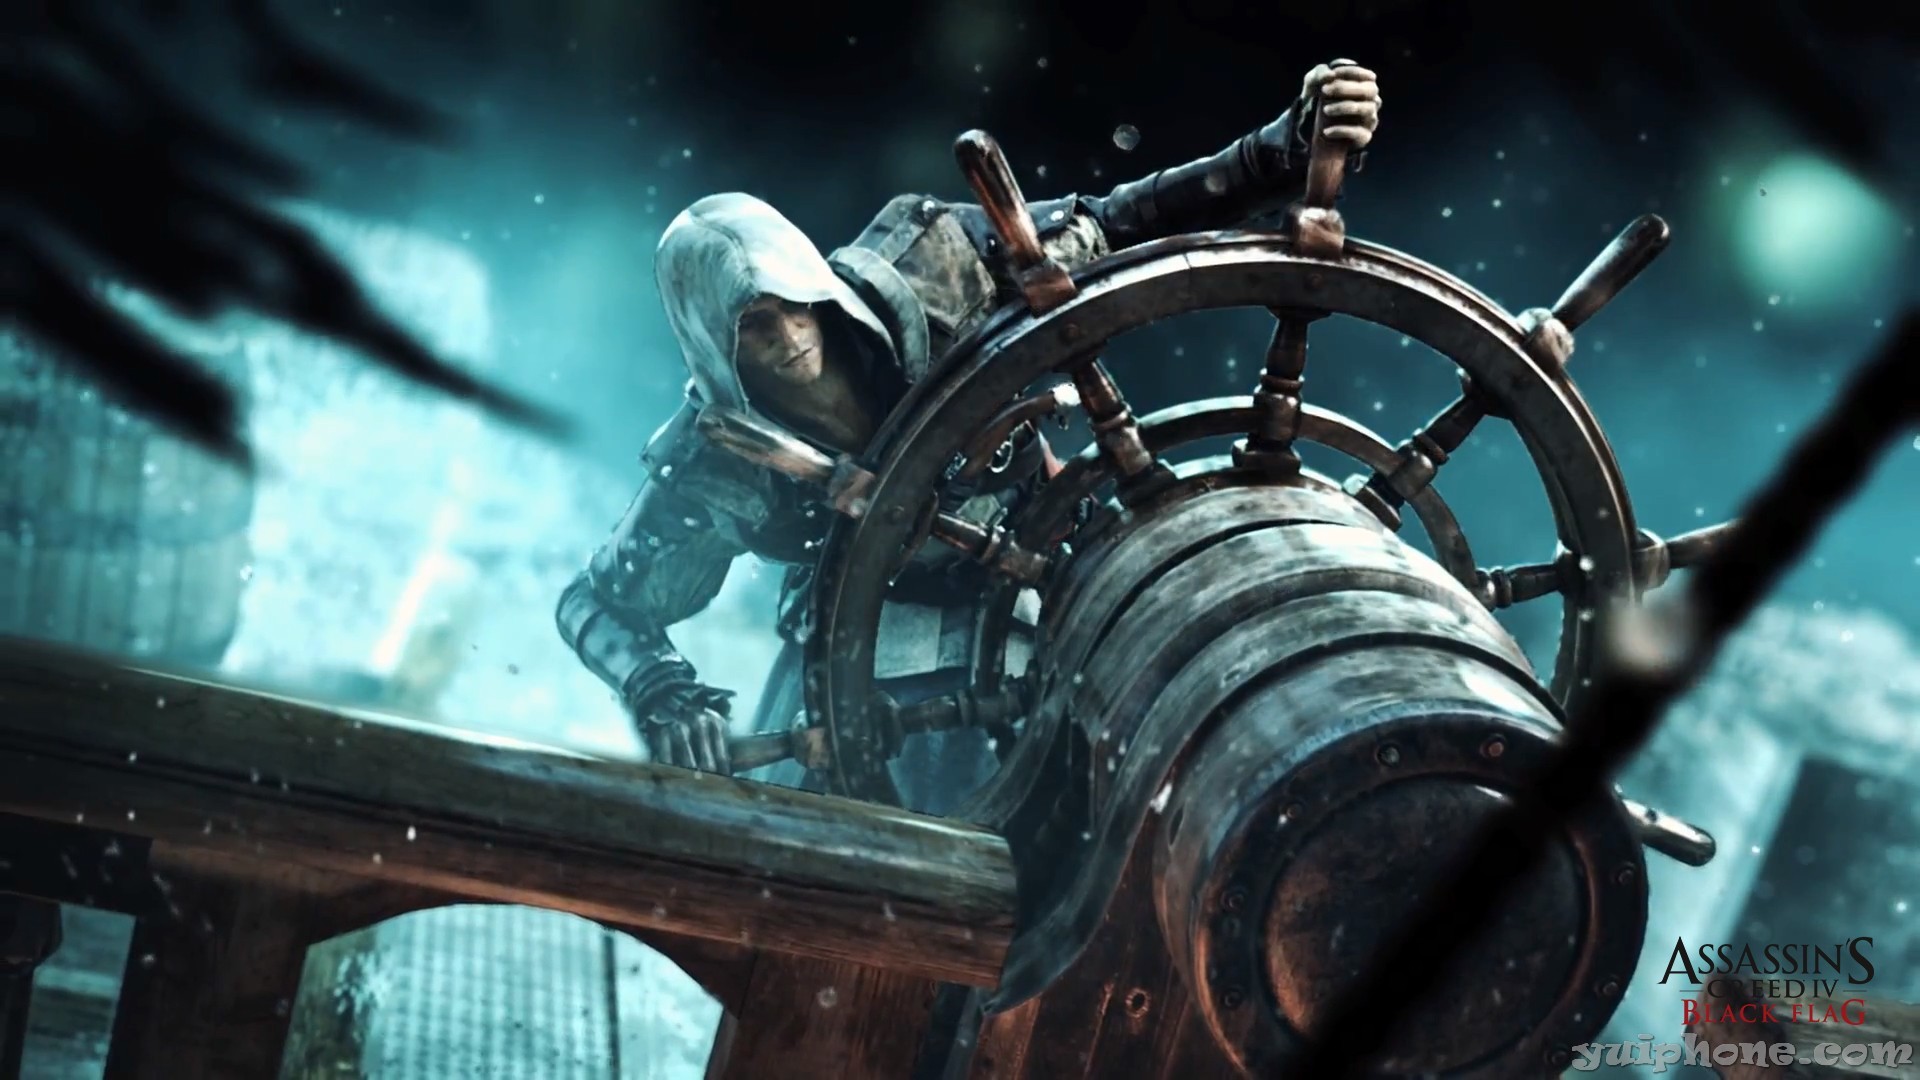 1920x1080 Edward-Kenway-at-the-helm-AC4-Assassins-Creed-Black-Flag-Wallpapers